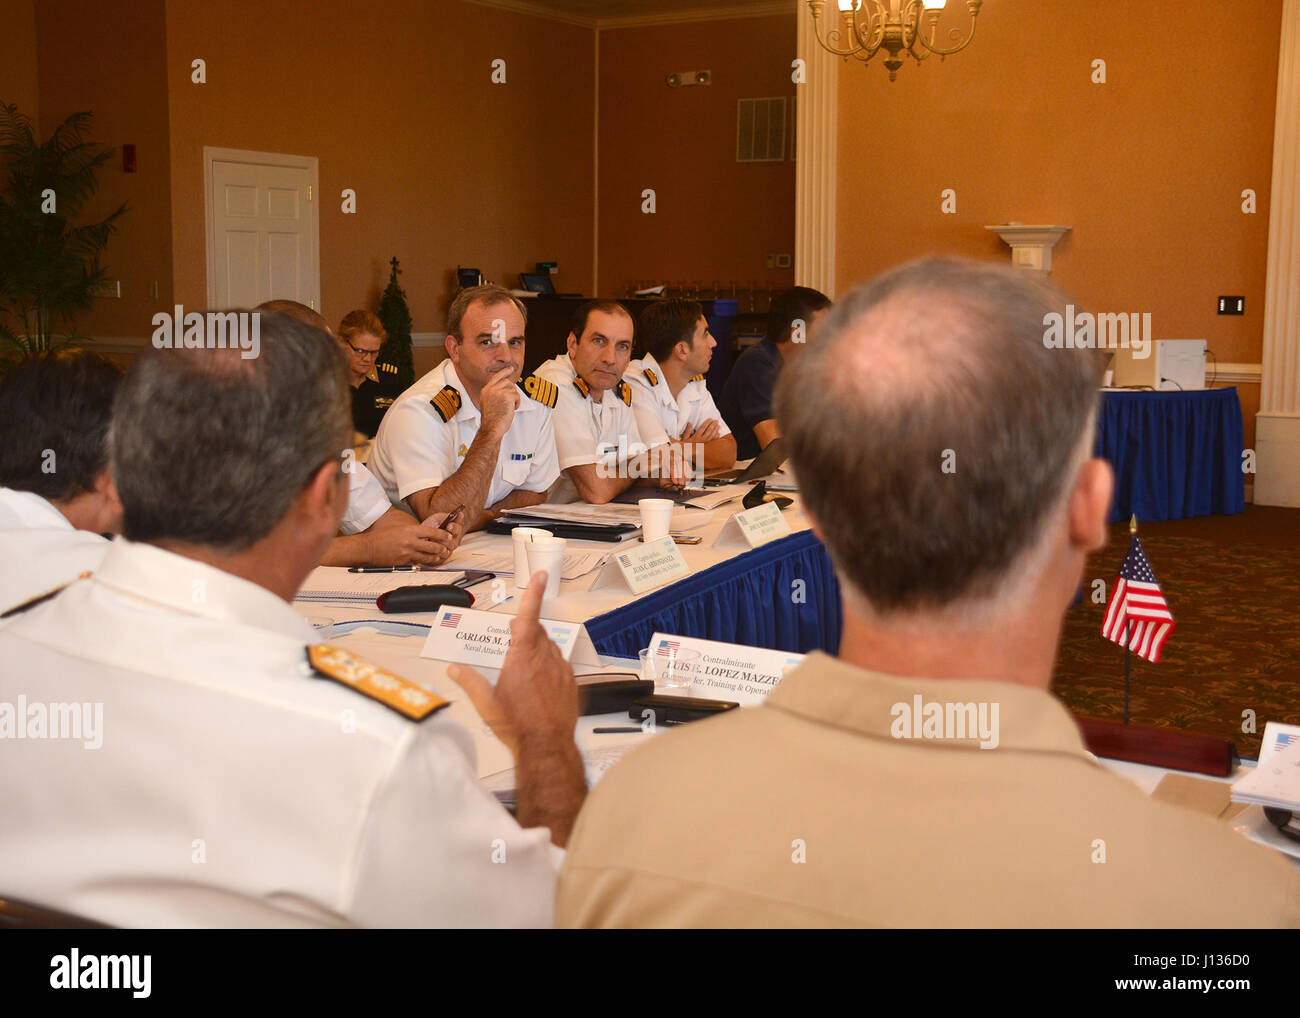 MAYPORT, Fla. (Apr. 04, 2017) – Argentine naval delegation listens to Rear Adm. Luis Mazzeo, left, speak during Maritime Staff Talks between the Argentine and U.S. navies, hosted by Commander, U.S. Naval Forces Southern Command/U.S. 4th Fleet Rear Adm. Sean Buck, right. The MST takes place over the span of three days from Apr. 3-5. (U.S. Navy photo by Mass Communication Specialist 2nd Class Michael Hendricks/Released) Stock Photo